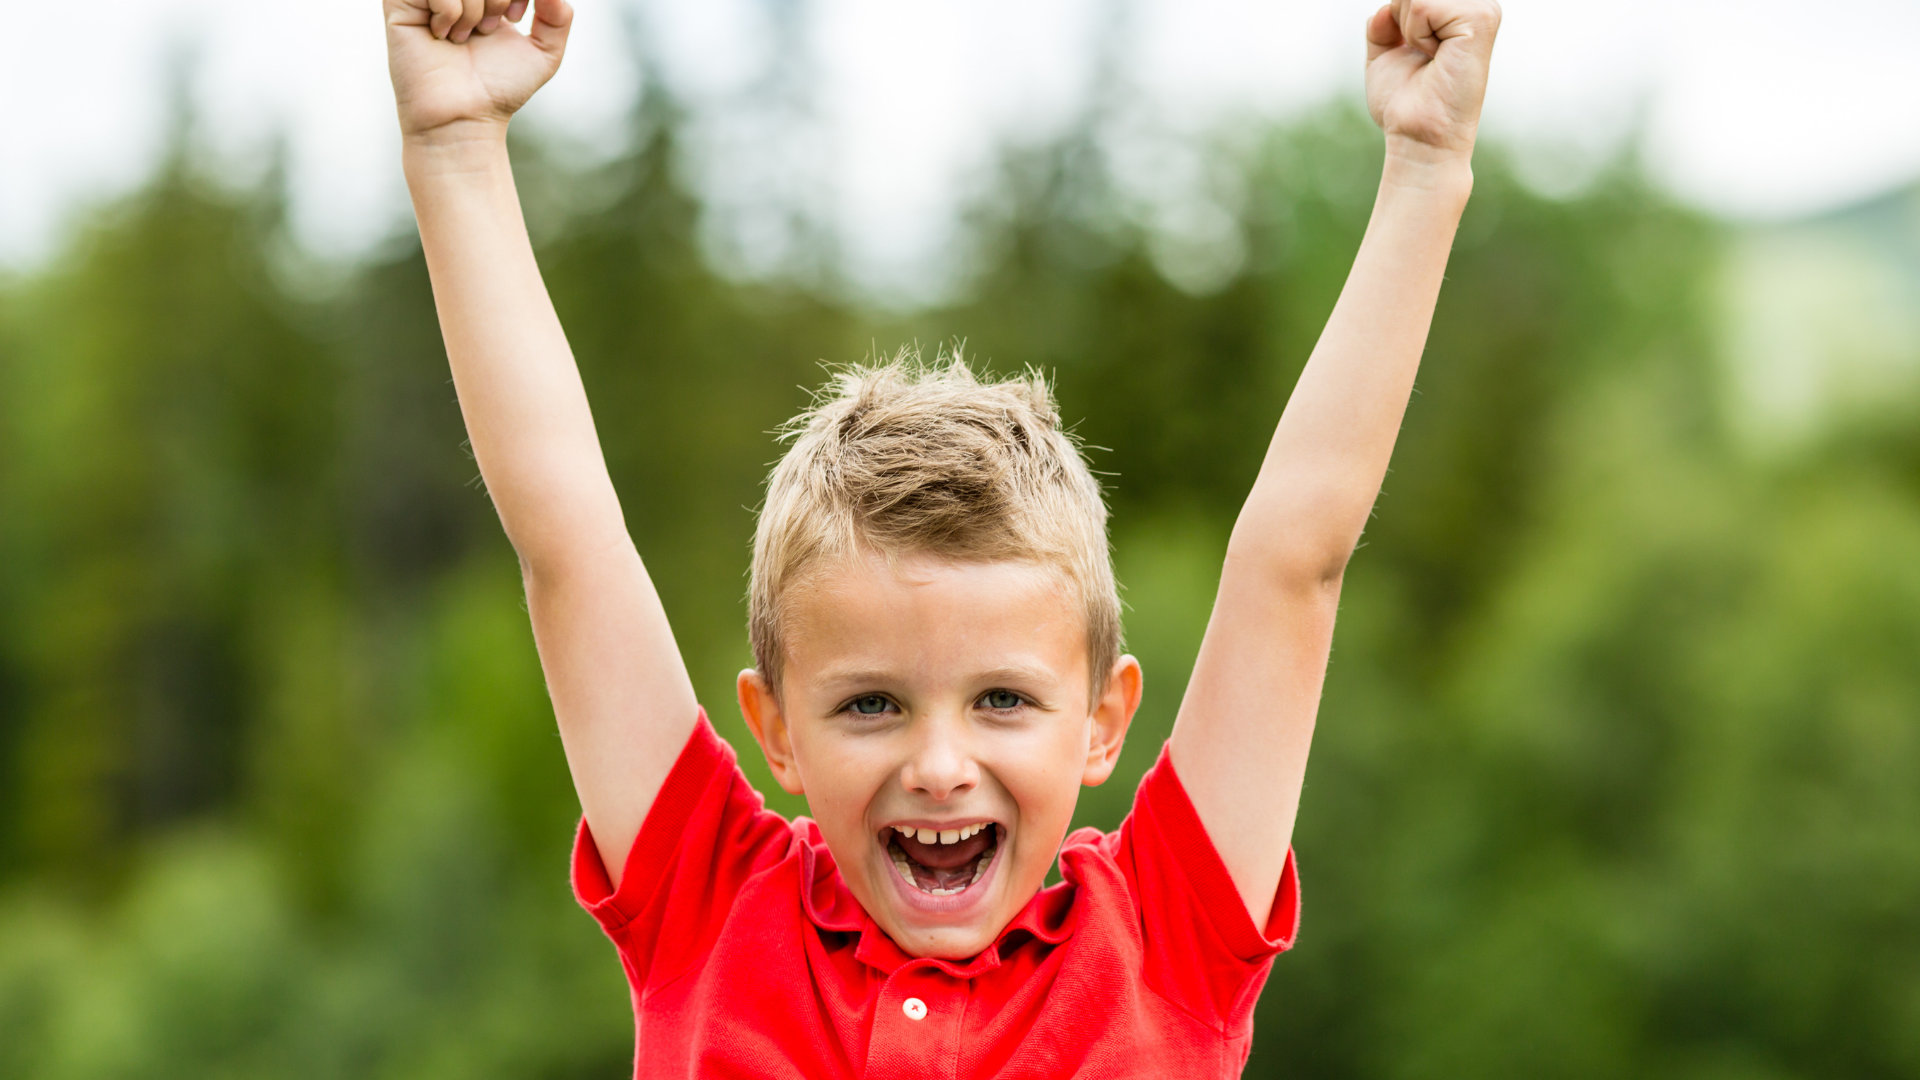 How to help toddlers develop intrinsic motivation and raise their self-esteem?